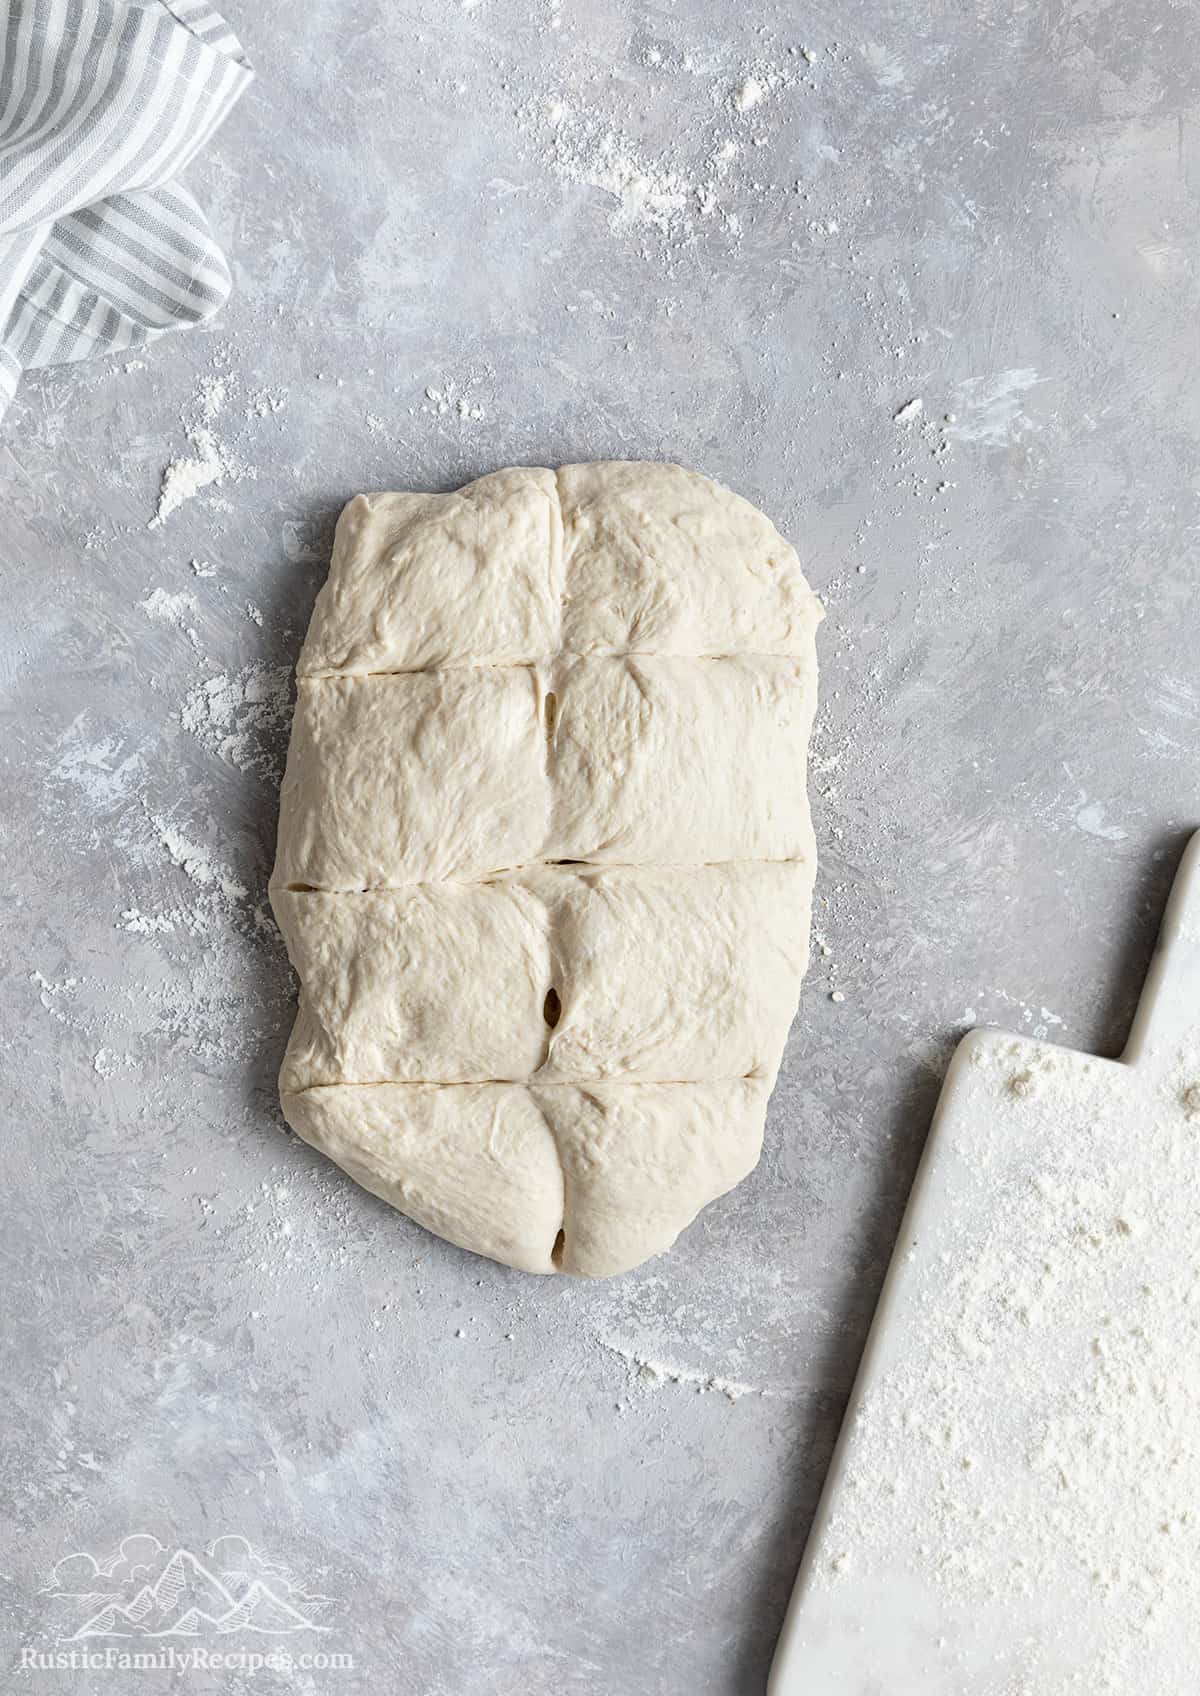 Dough sectioned into 8 equal pieces. 